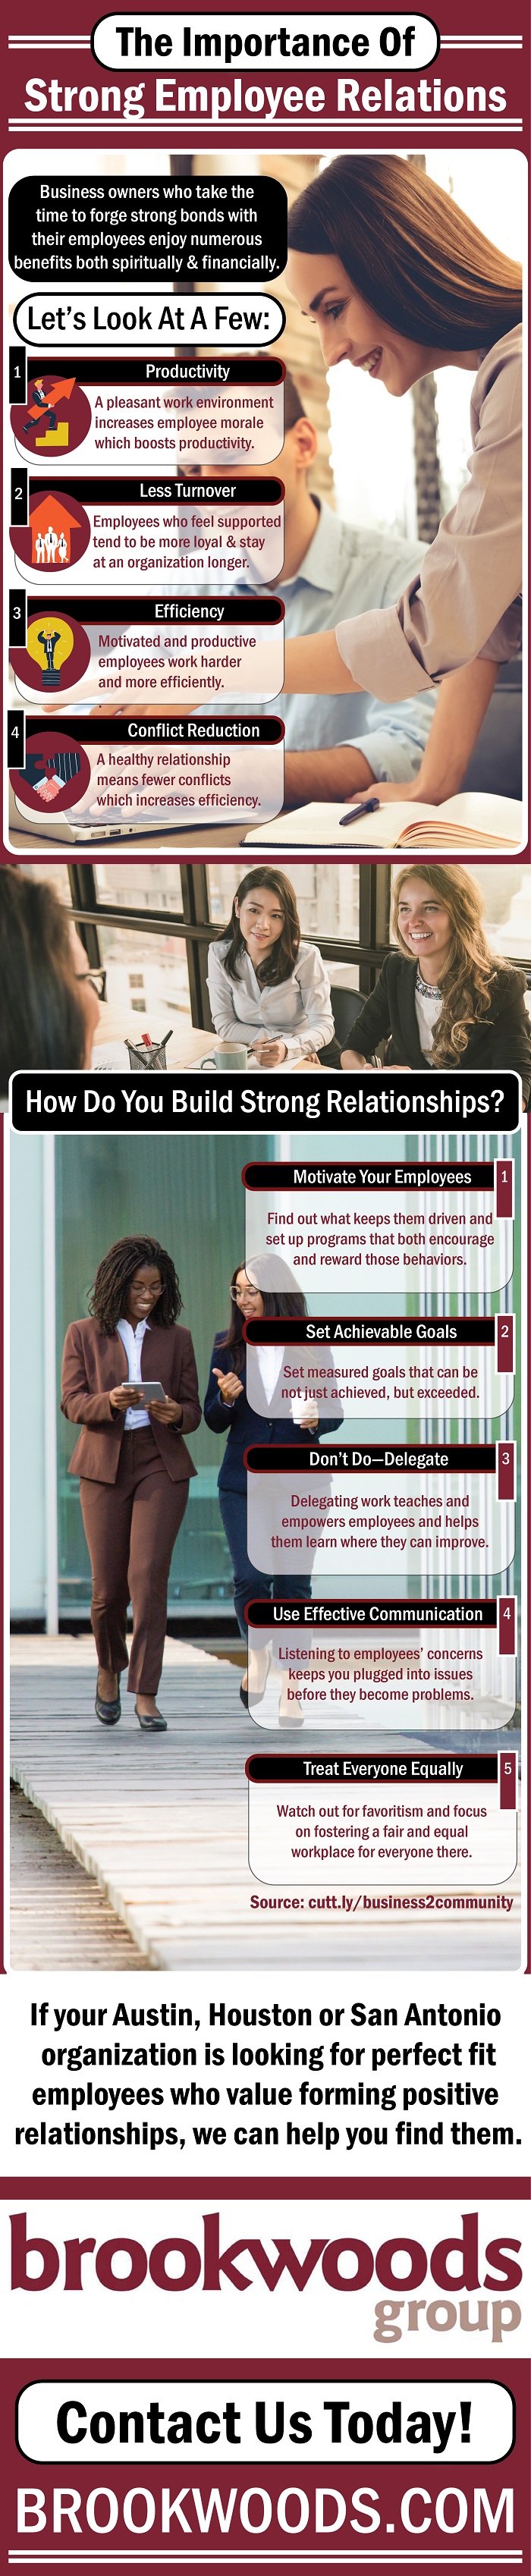 The Importance Of Strong Employee Relations